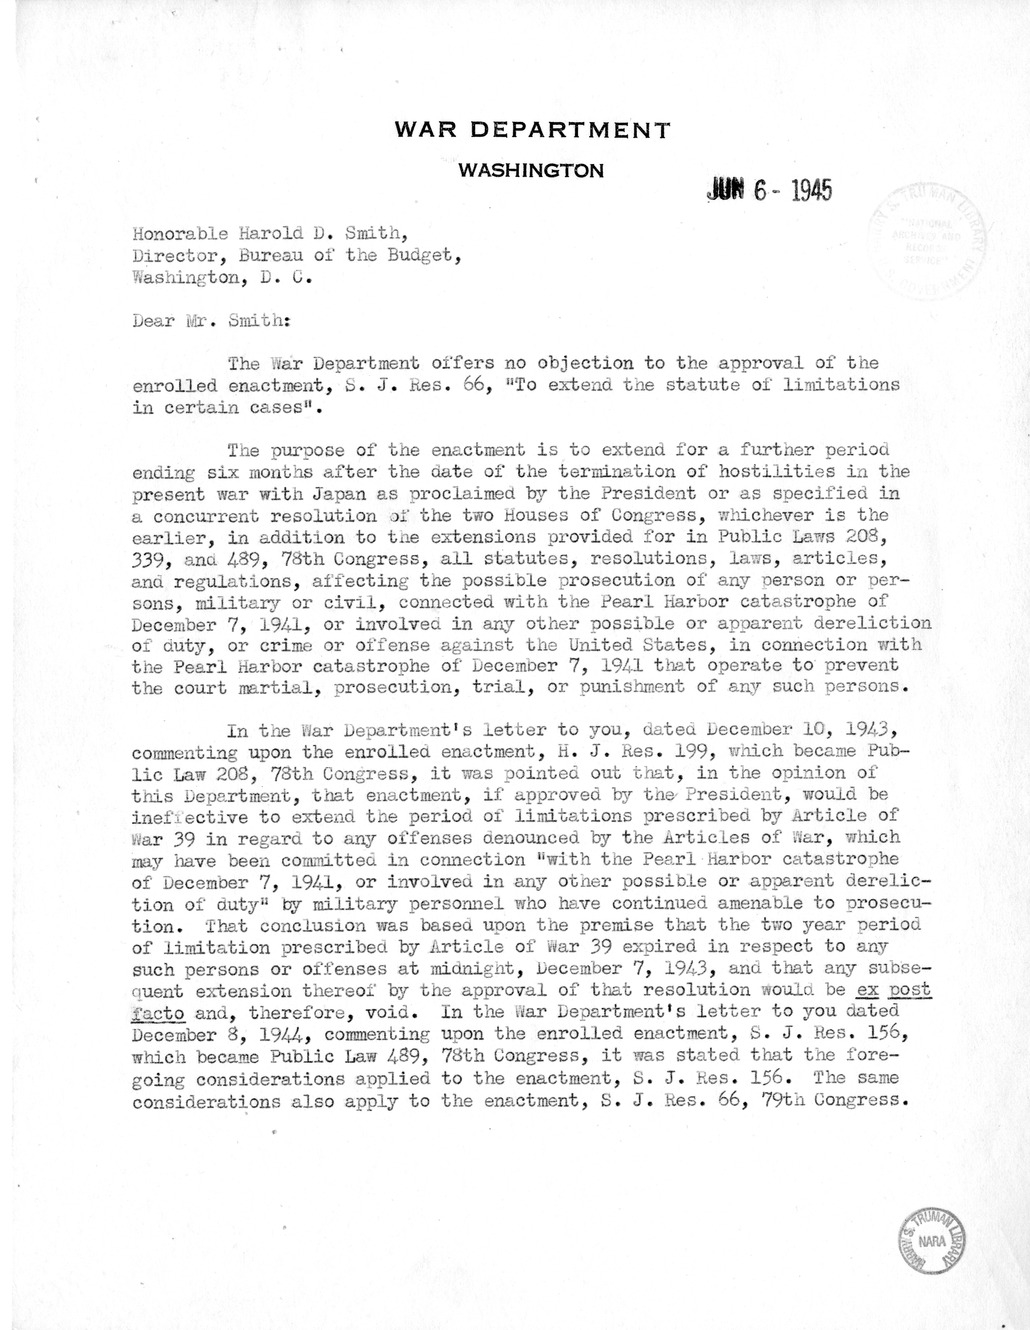 Memorandum from Harold D. Smith to M. C. Latta, S.J. Res. 66, to Extend the Statute of Limitations in Certain Cases, with Attachments